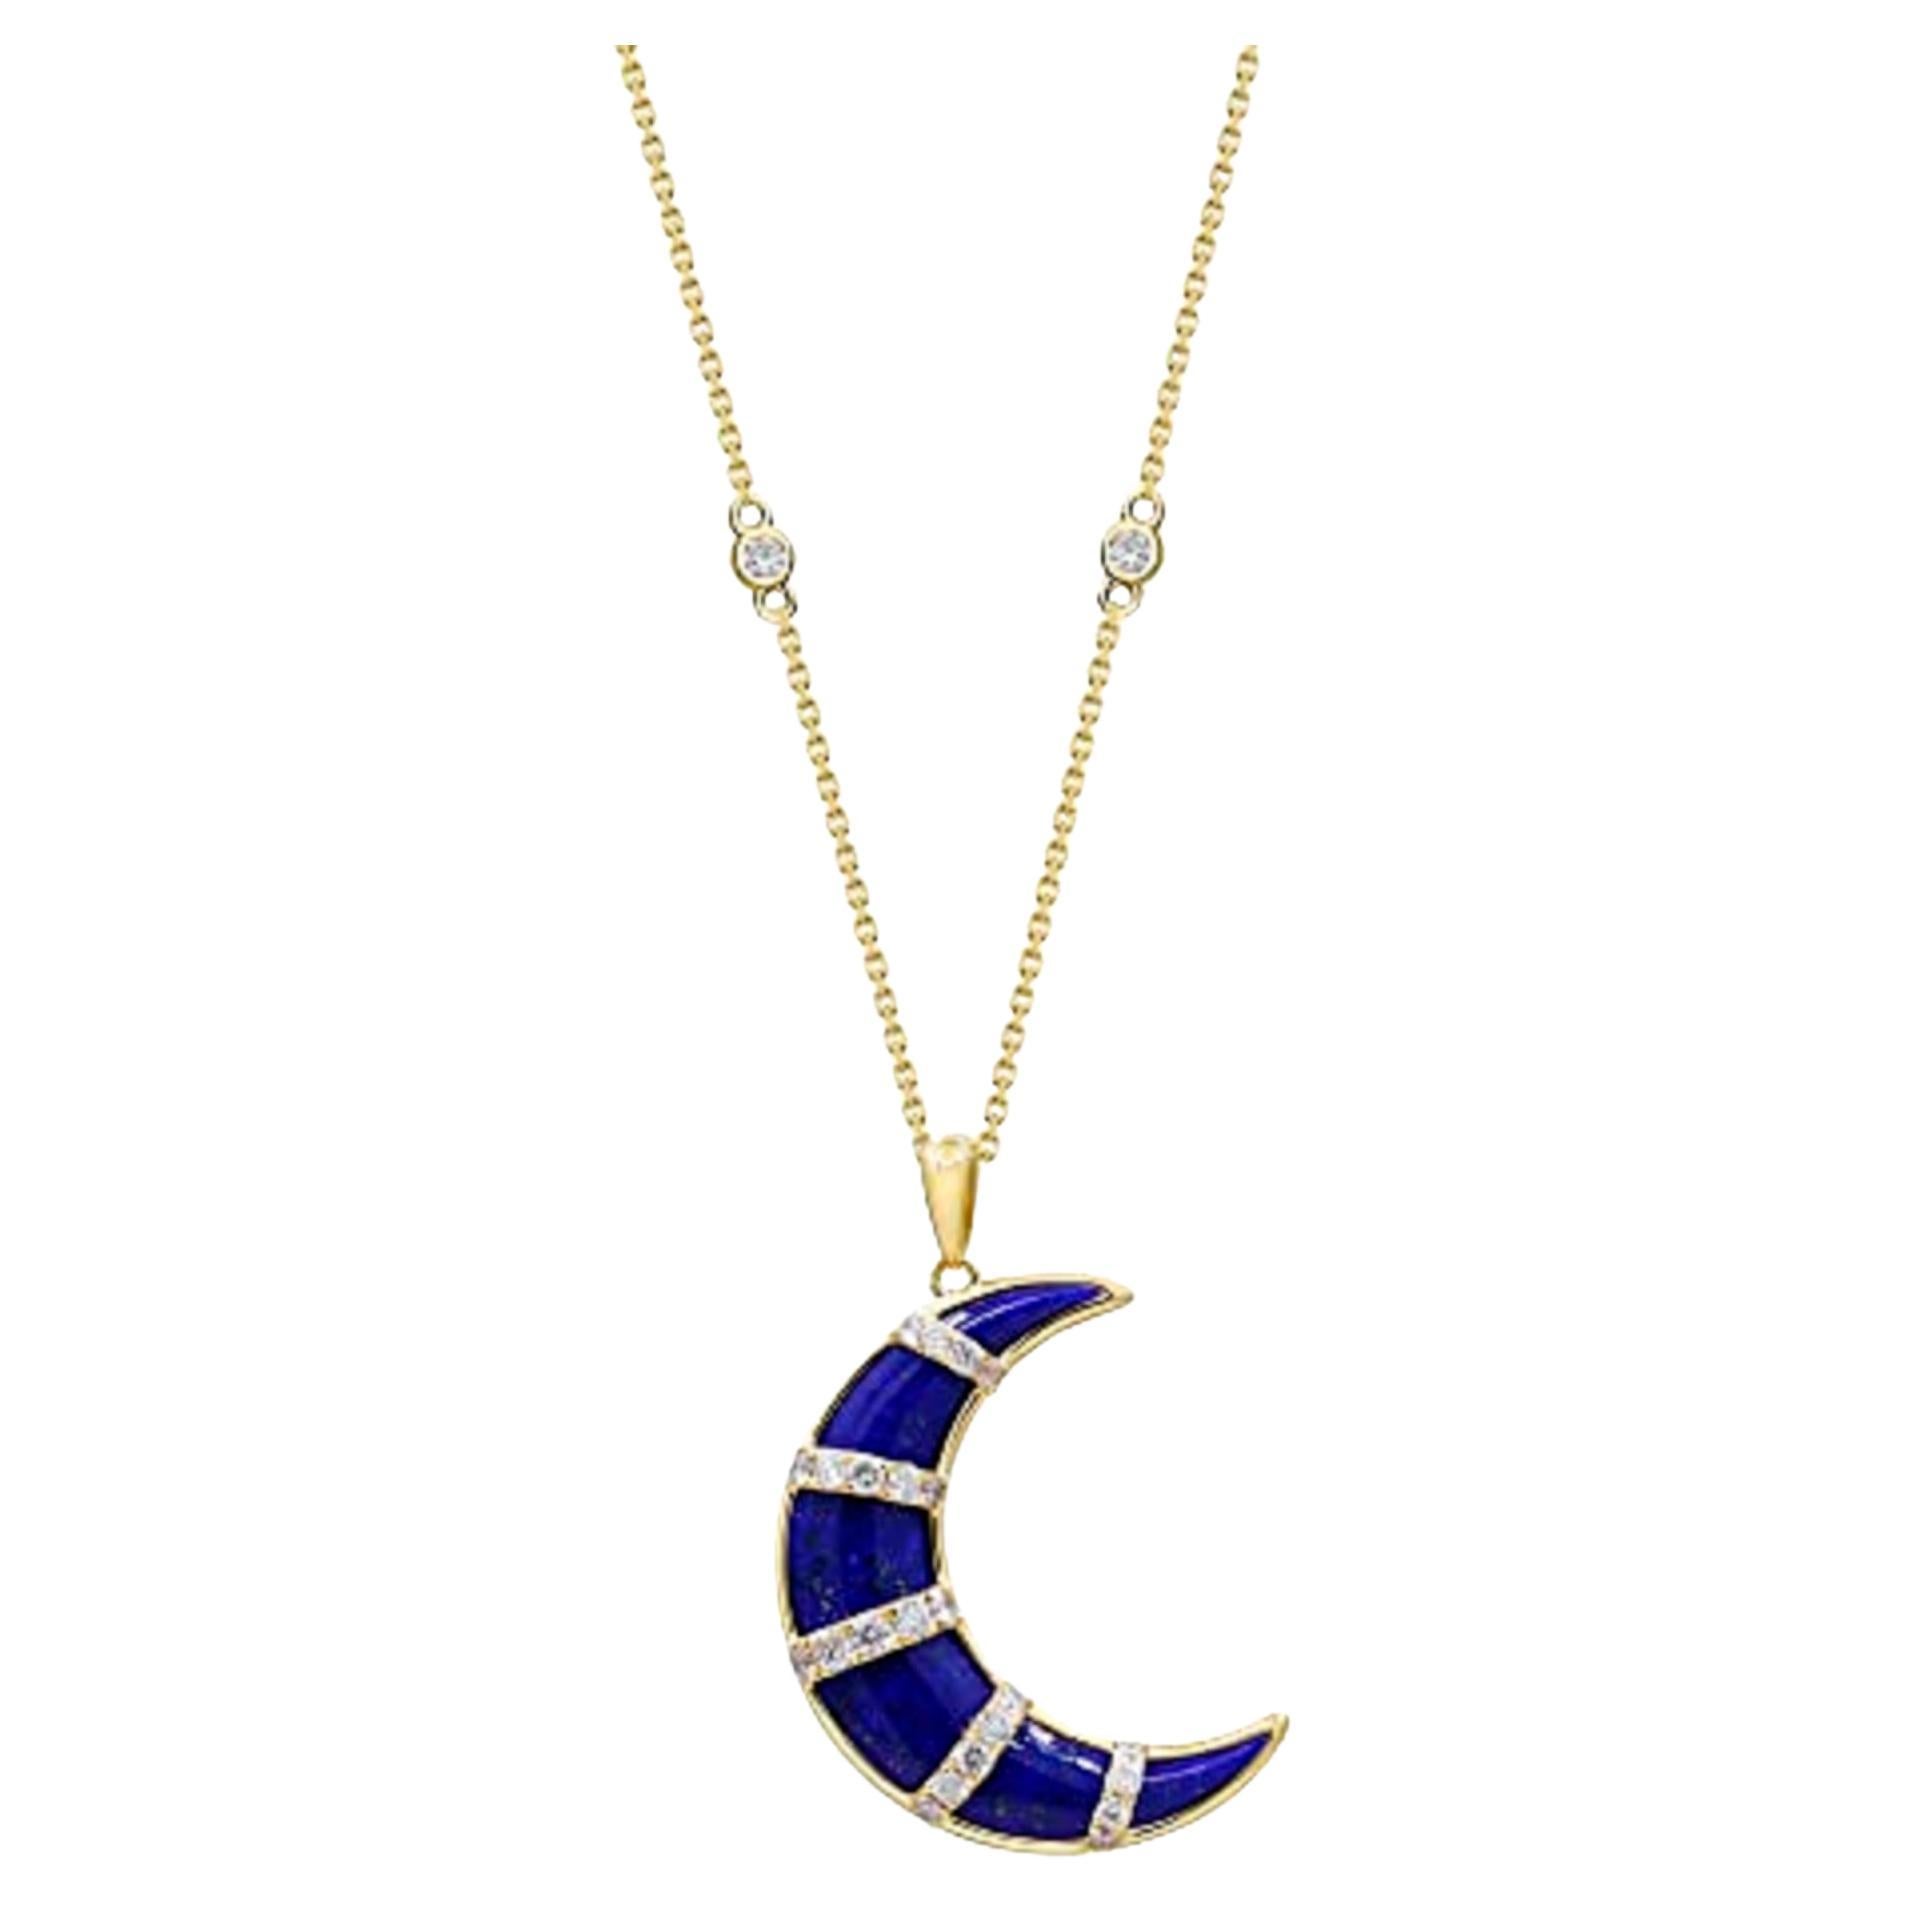 Gin & Grace 14K Yellow Gold Genuine Lapis Pendant with Diamonds for women. For Sale